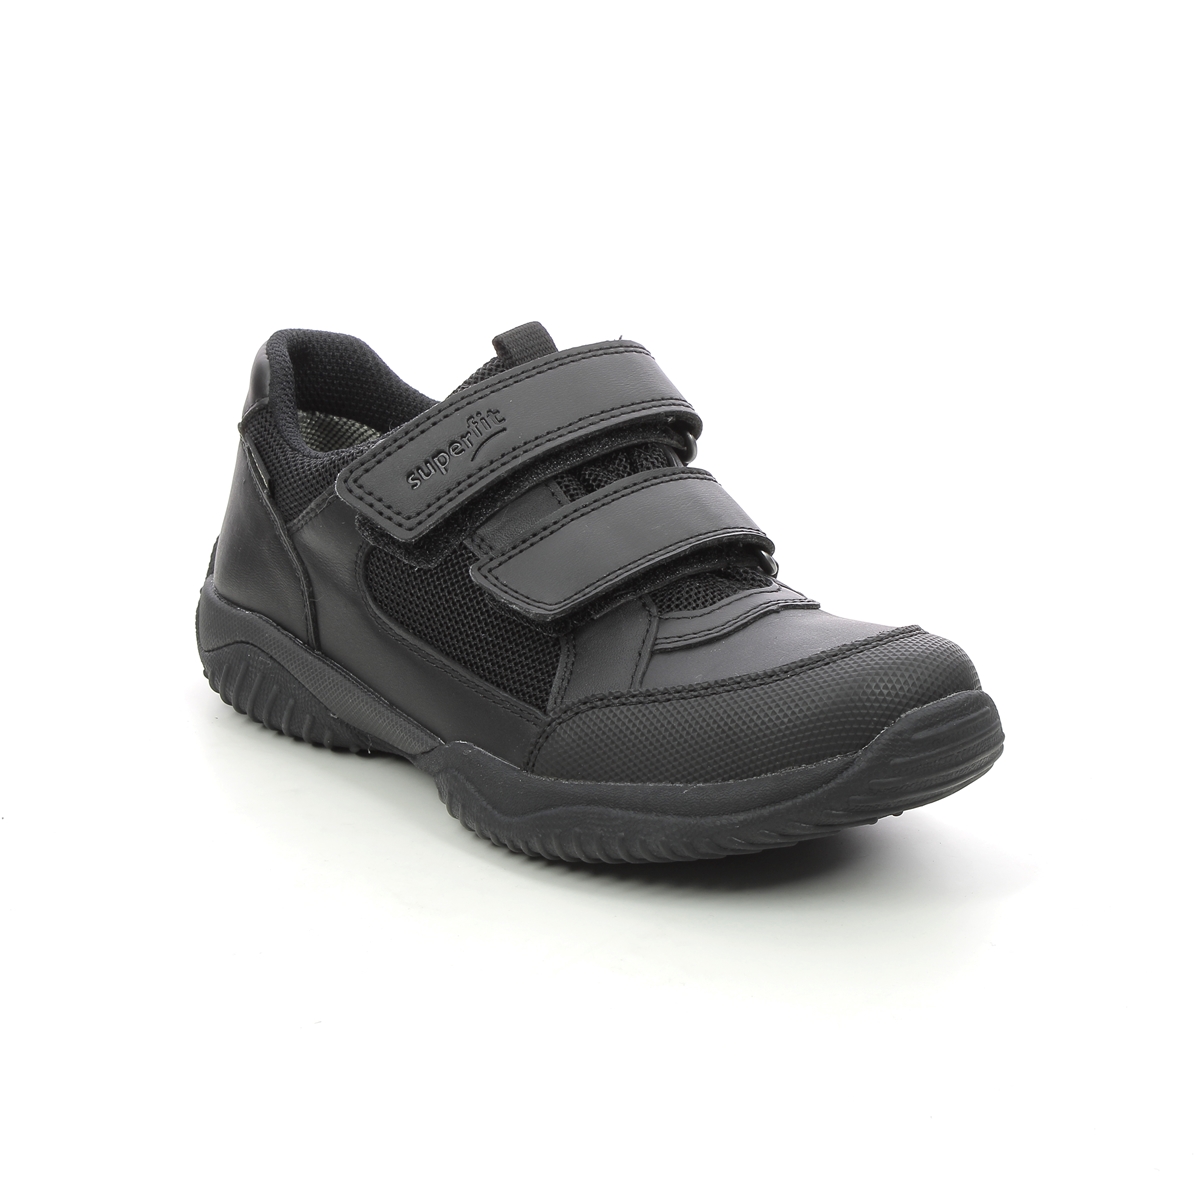 Superfit Storm Shoe Gtx Black Leather Kids Boys Casual Shoes 1009382-0000 In Size 34 In Plain Black Leather For kids